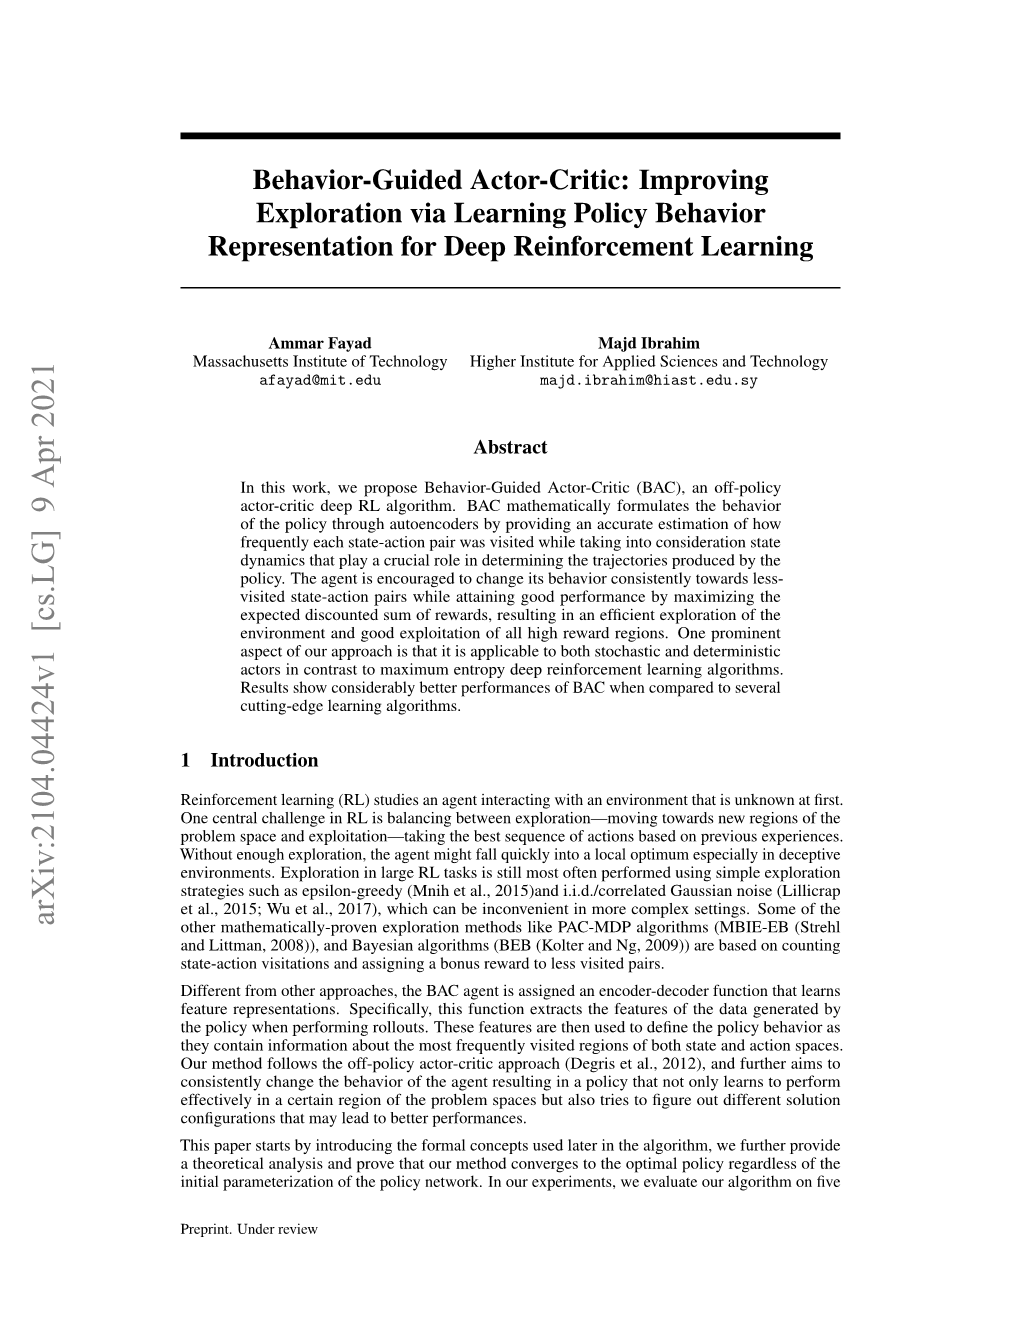 Behavior-Guided Actor-Critic: Improving Exploration Via Learning Policy Behavior Representation for Deep Reinforcement Learning